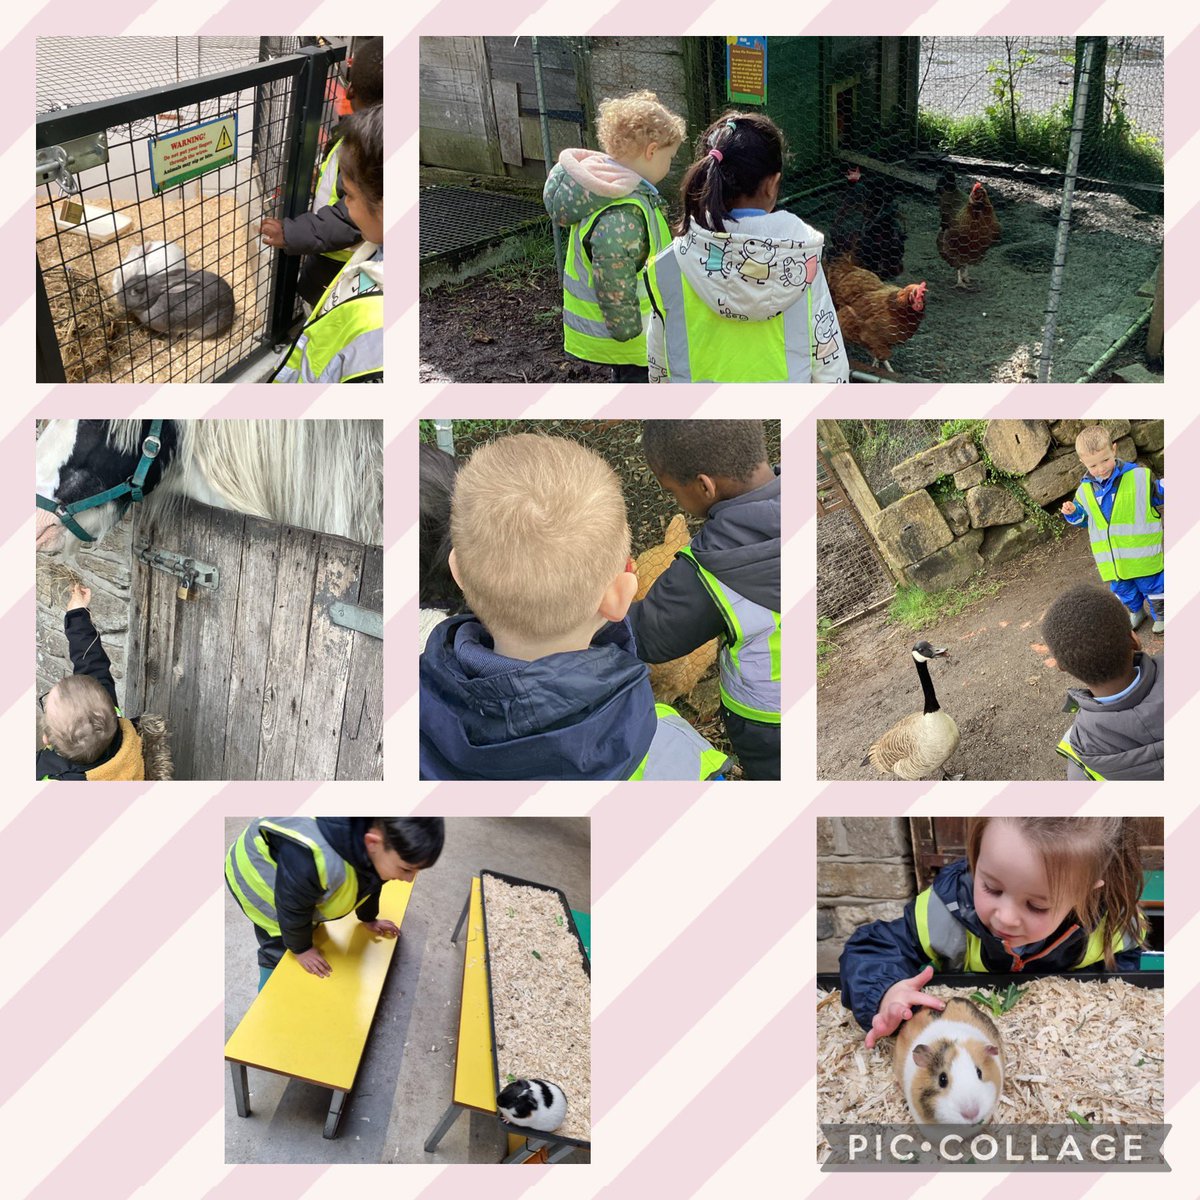 The children had a lovely time at the farm today. We got to see, pet and feed lots of animals, before the rain came ☔️ 🐭🐷🪿🐴🐣🐔🐐#makingmemories #farm #ourfirsttrip @Inspire_Ashton @TrustVictorious